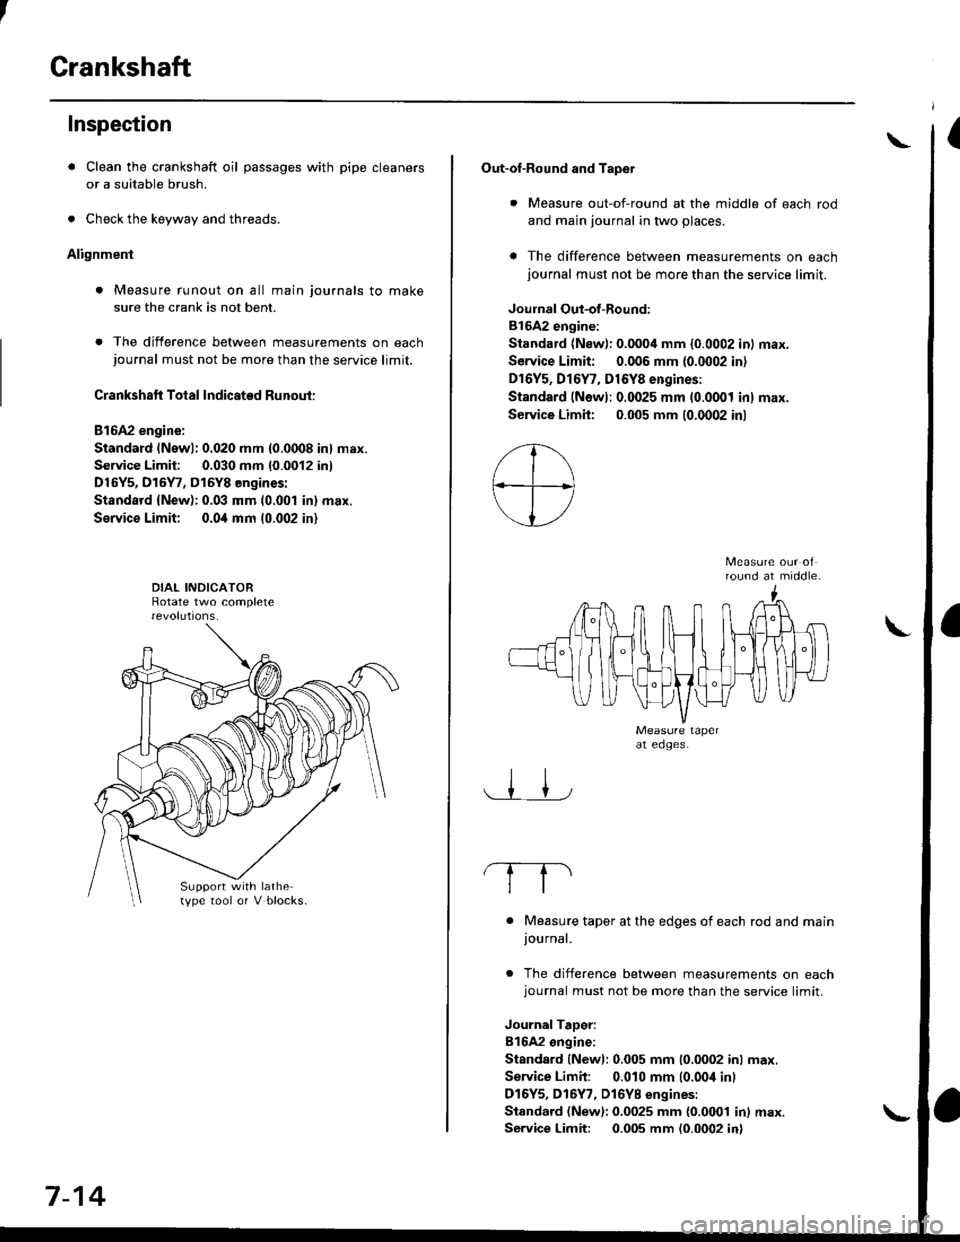 HONDA CIVIC 1996 6.G Owners Guide Crankshaft
Inspection
. Clean the crankshaft oil passages with pipe cleaners
or a suitable brush.
. Check the keyway and threads.
Alignment
. Measure runout on all main journals to make
sure the crank